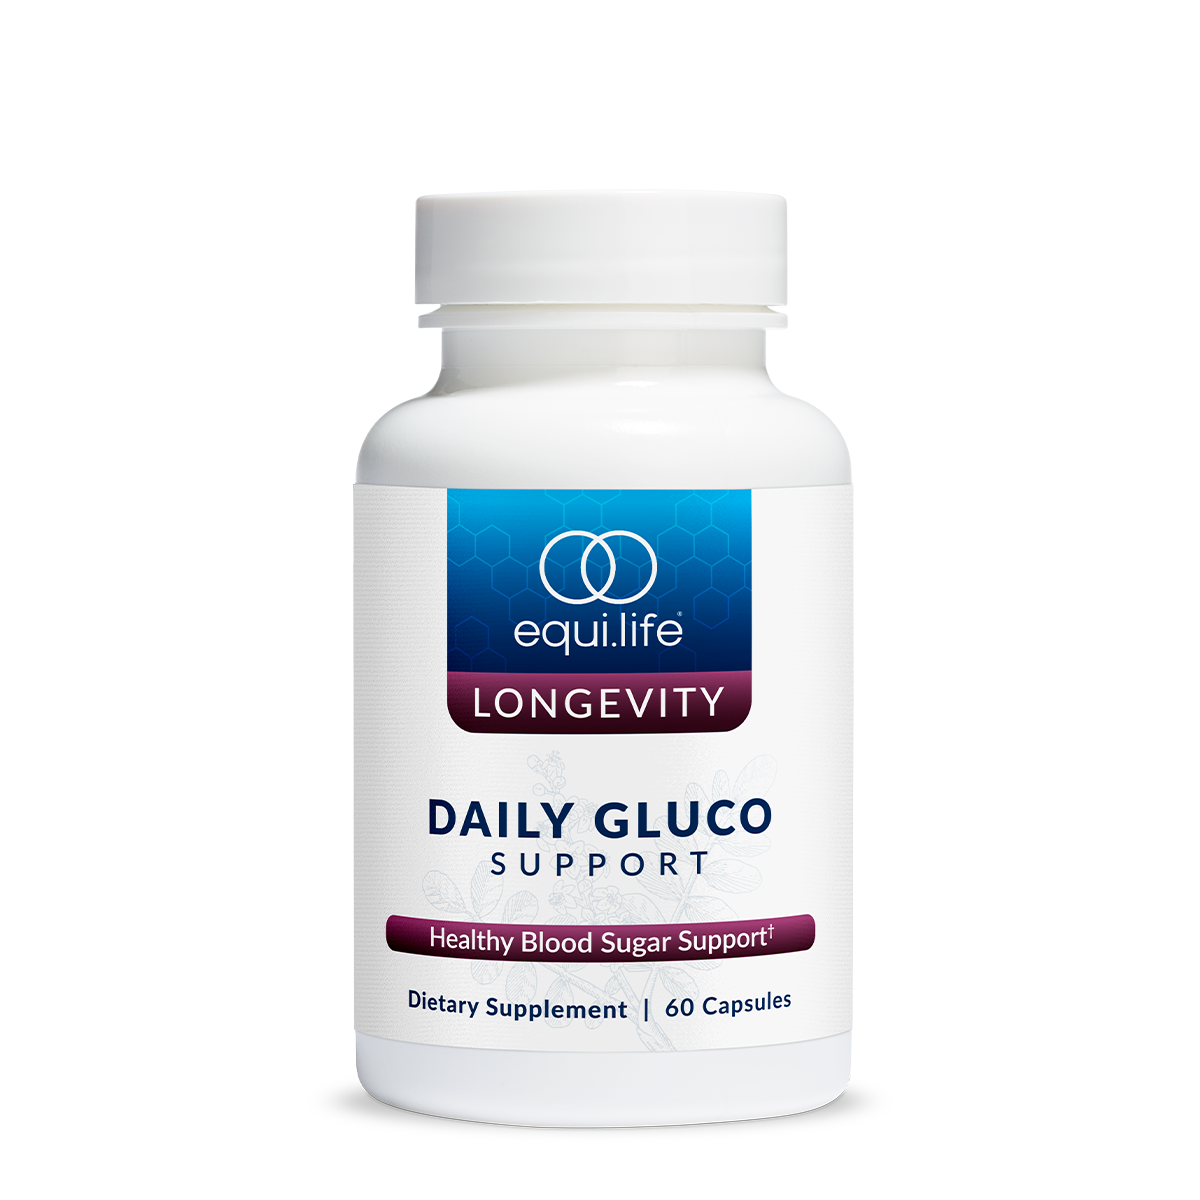 Daily Gluco Support